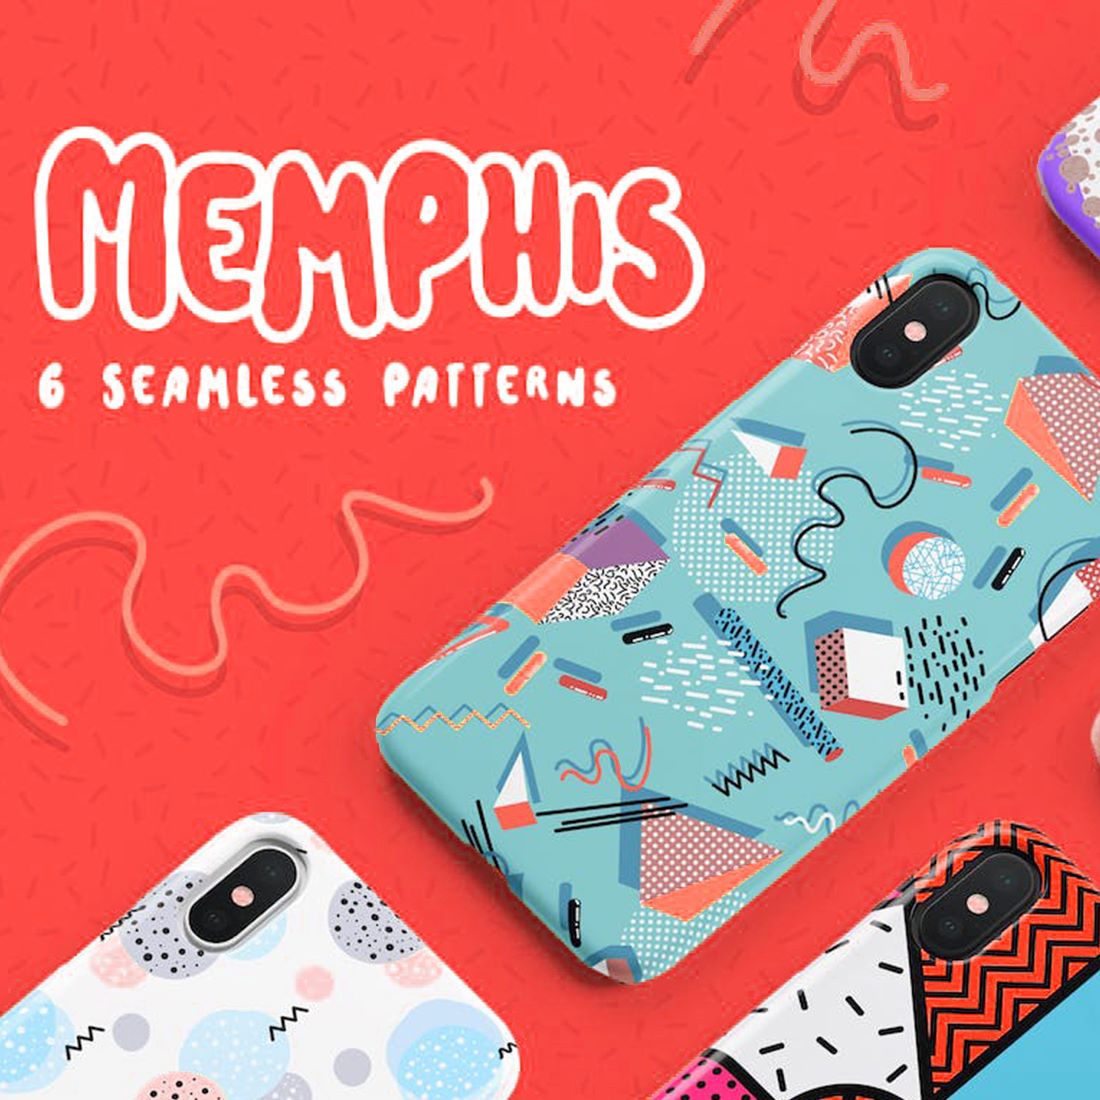 Memphis Seamless Patterns Collection cover image.